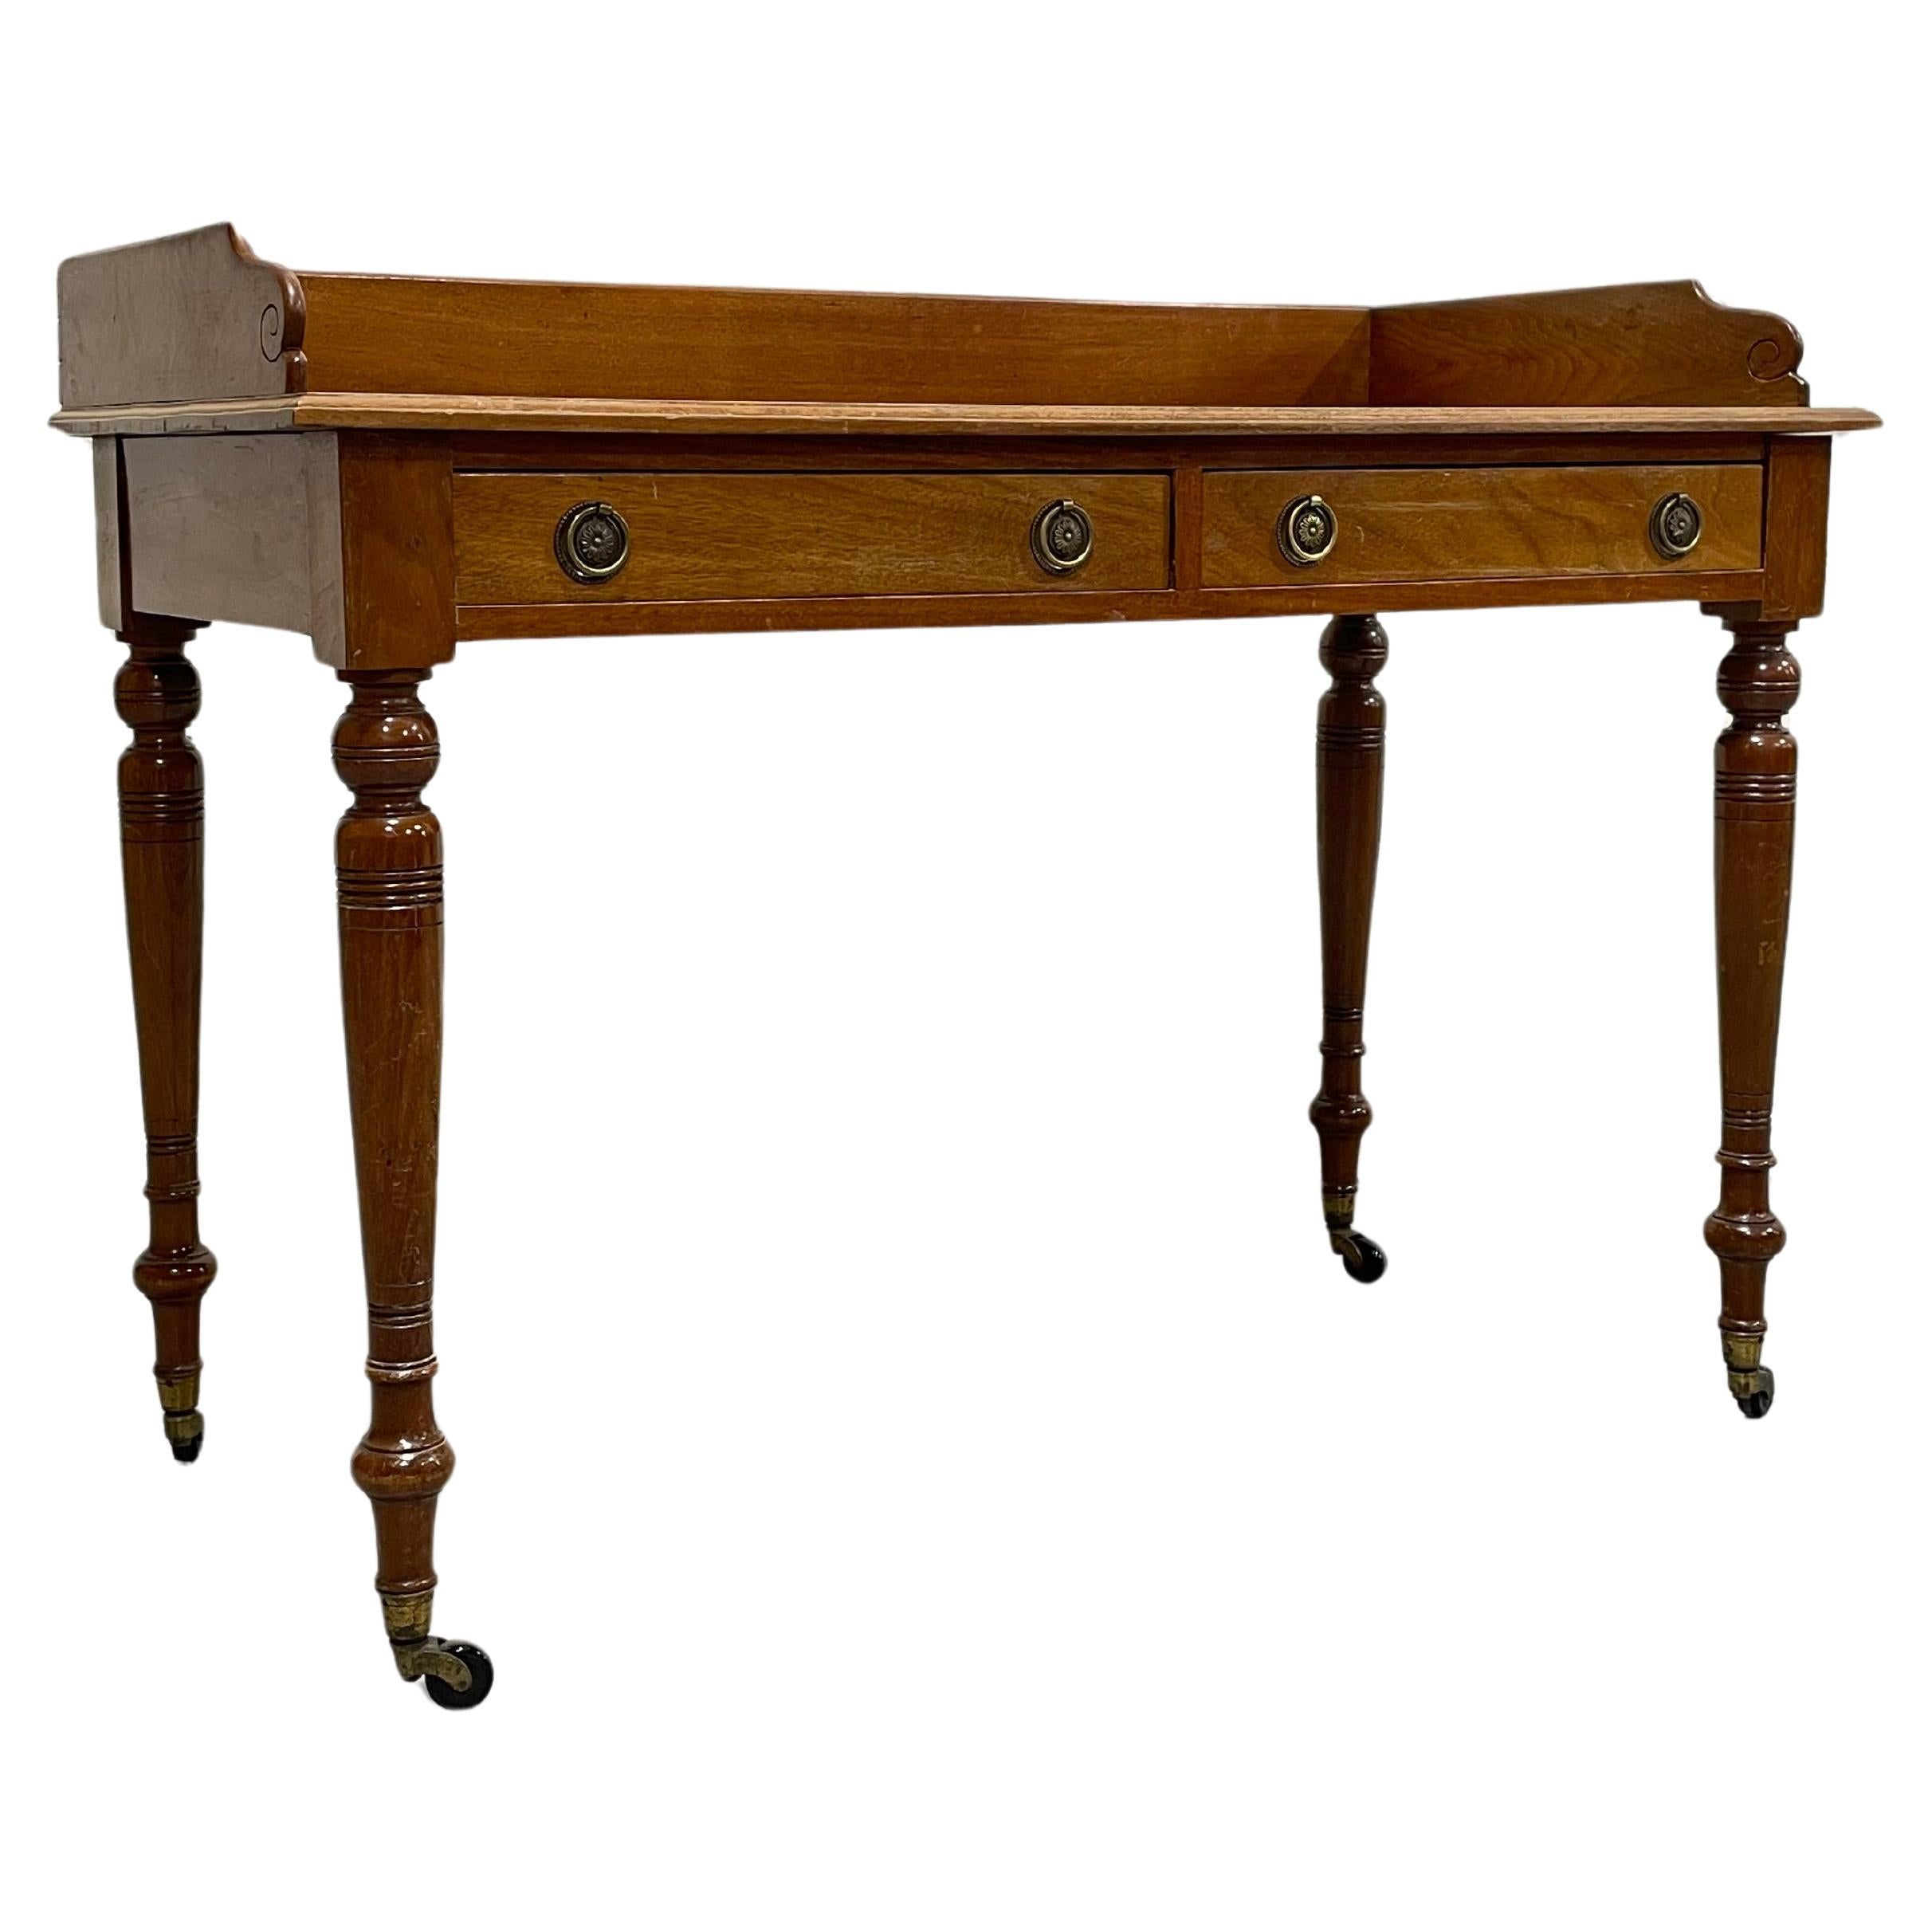 Handsome Antique Writing Table or Server featuring turned legs on castors, c. 1890. Two drawers with lovely pulls, a gilt embossed leather top and interesting period casters. Perfect little writing desk that can easily roll to change positions if